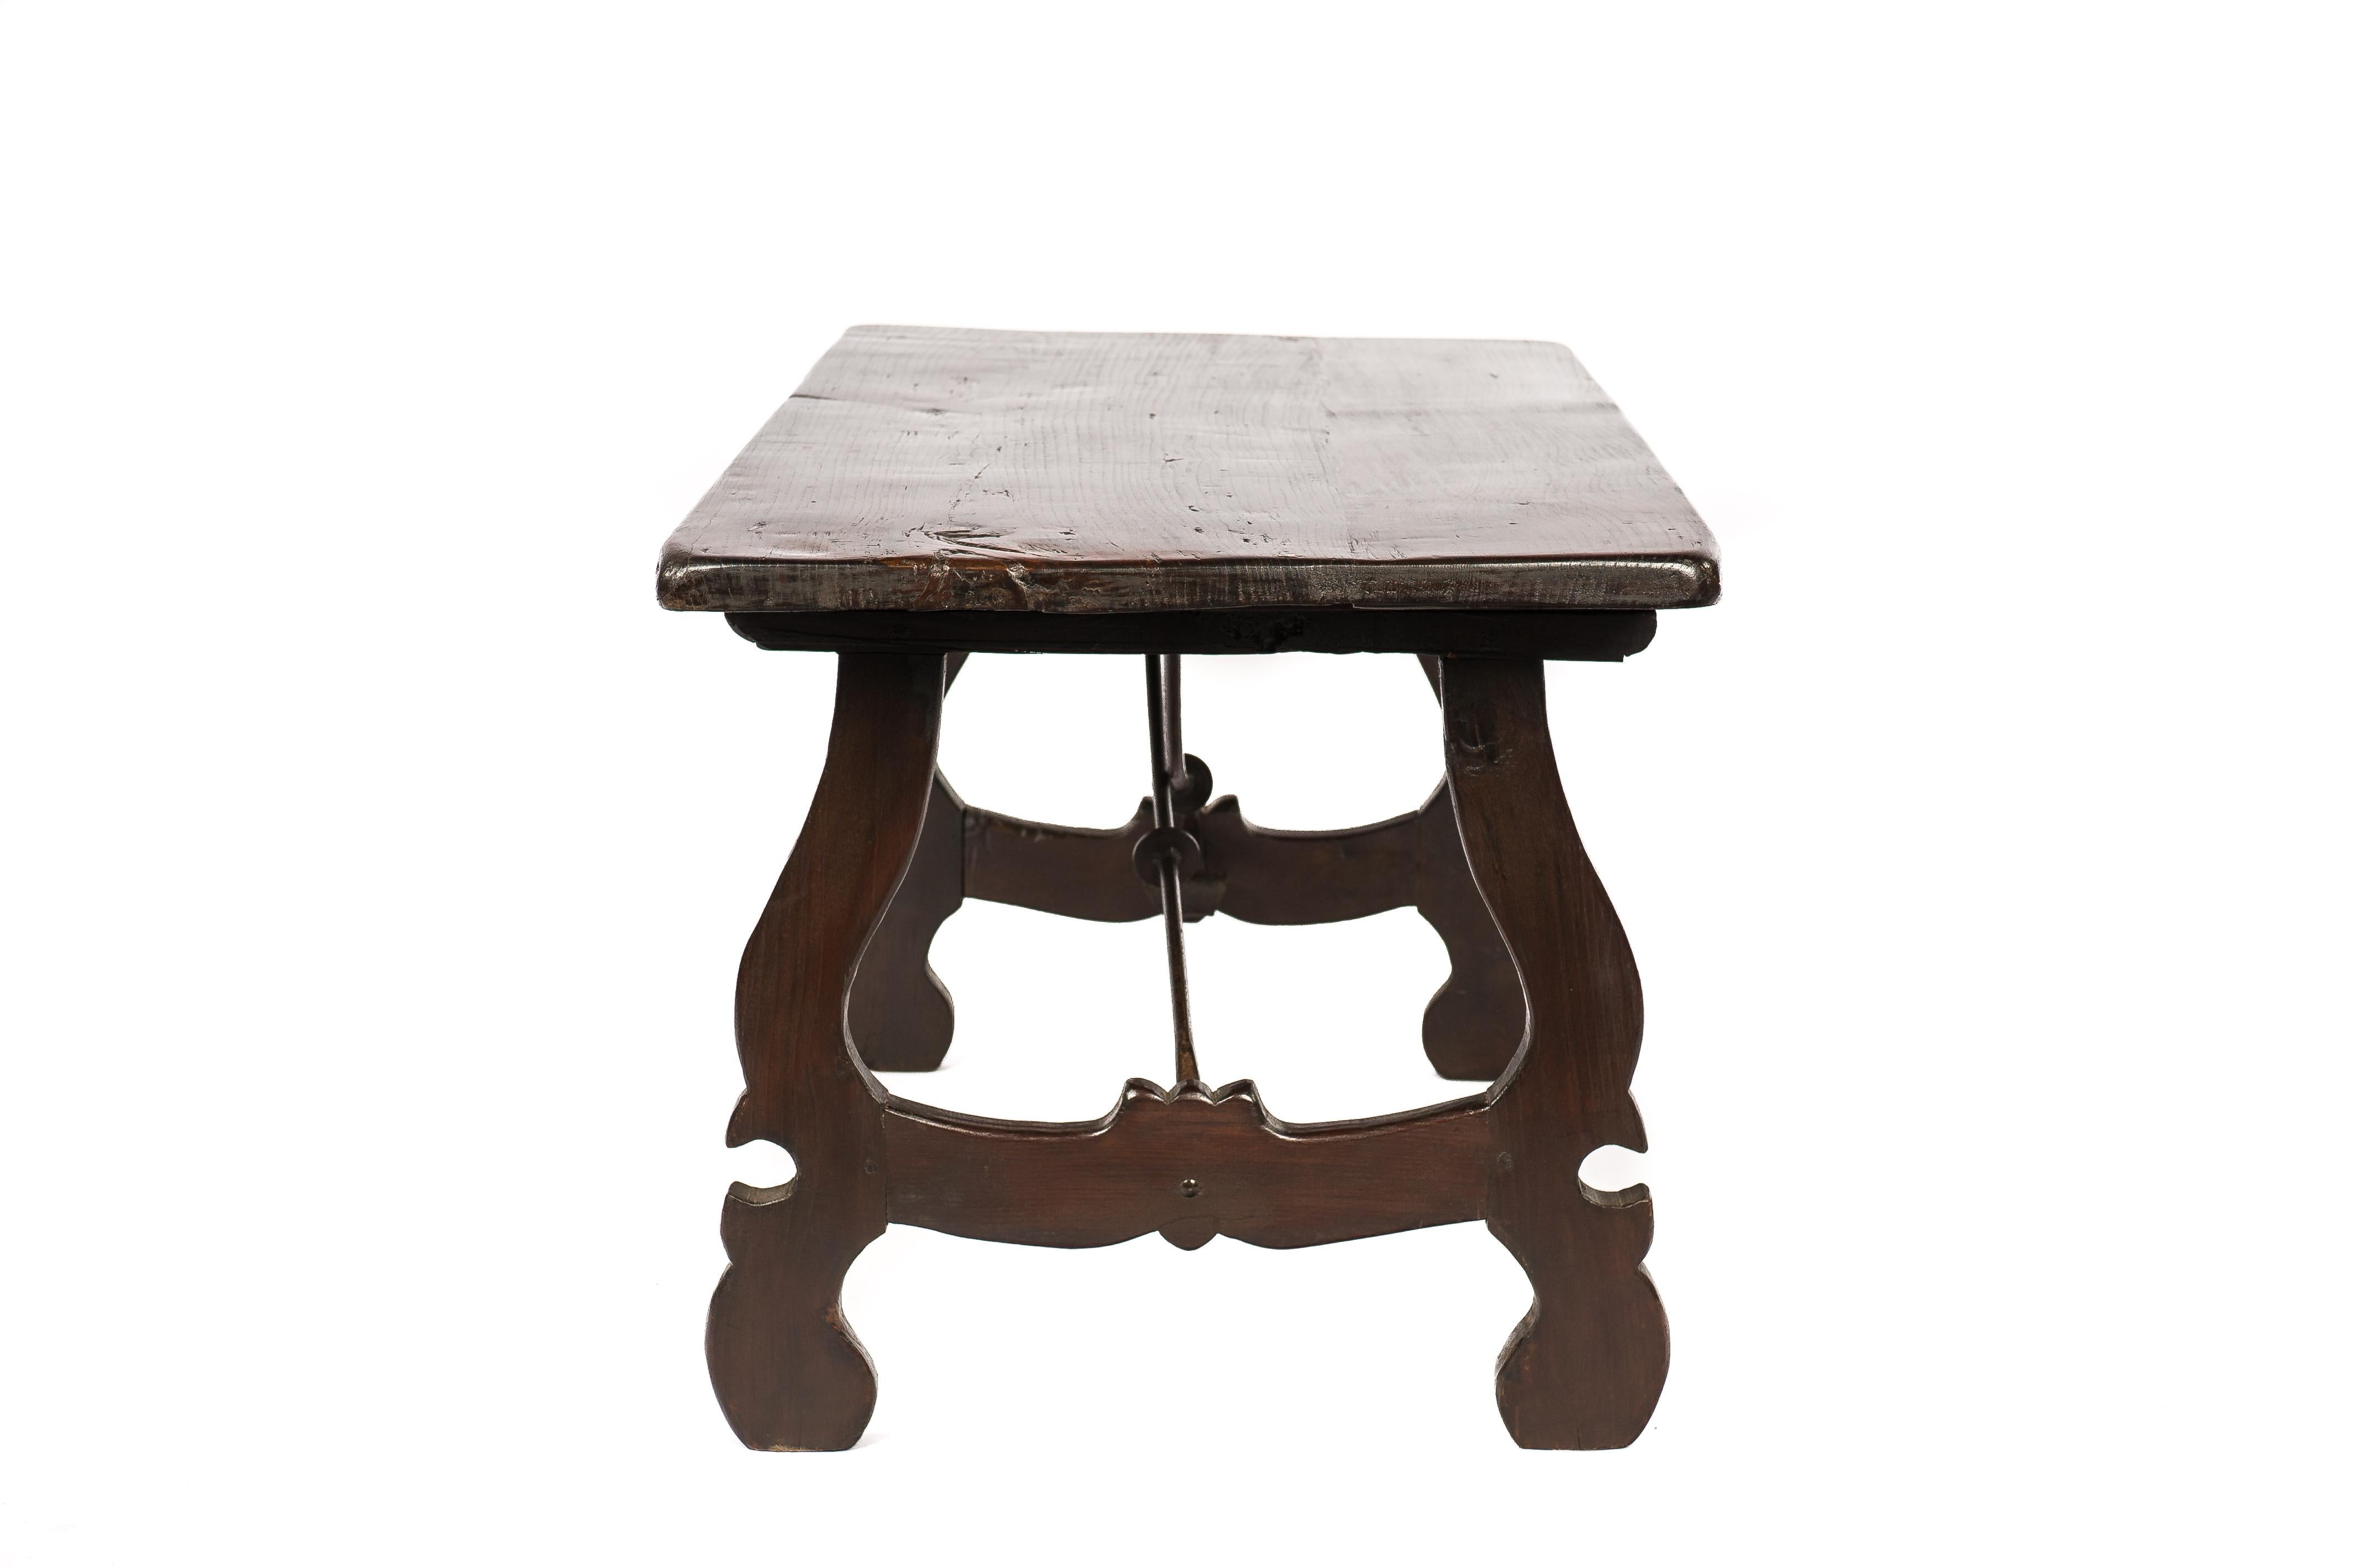 Spanish Antique 19th century dark brown chestnut baroque dining table with lyre legs For Sale